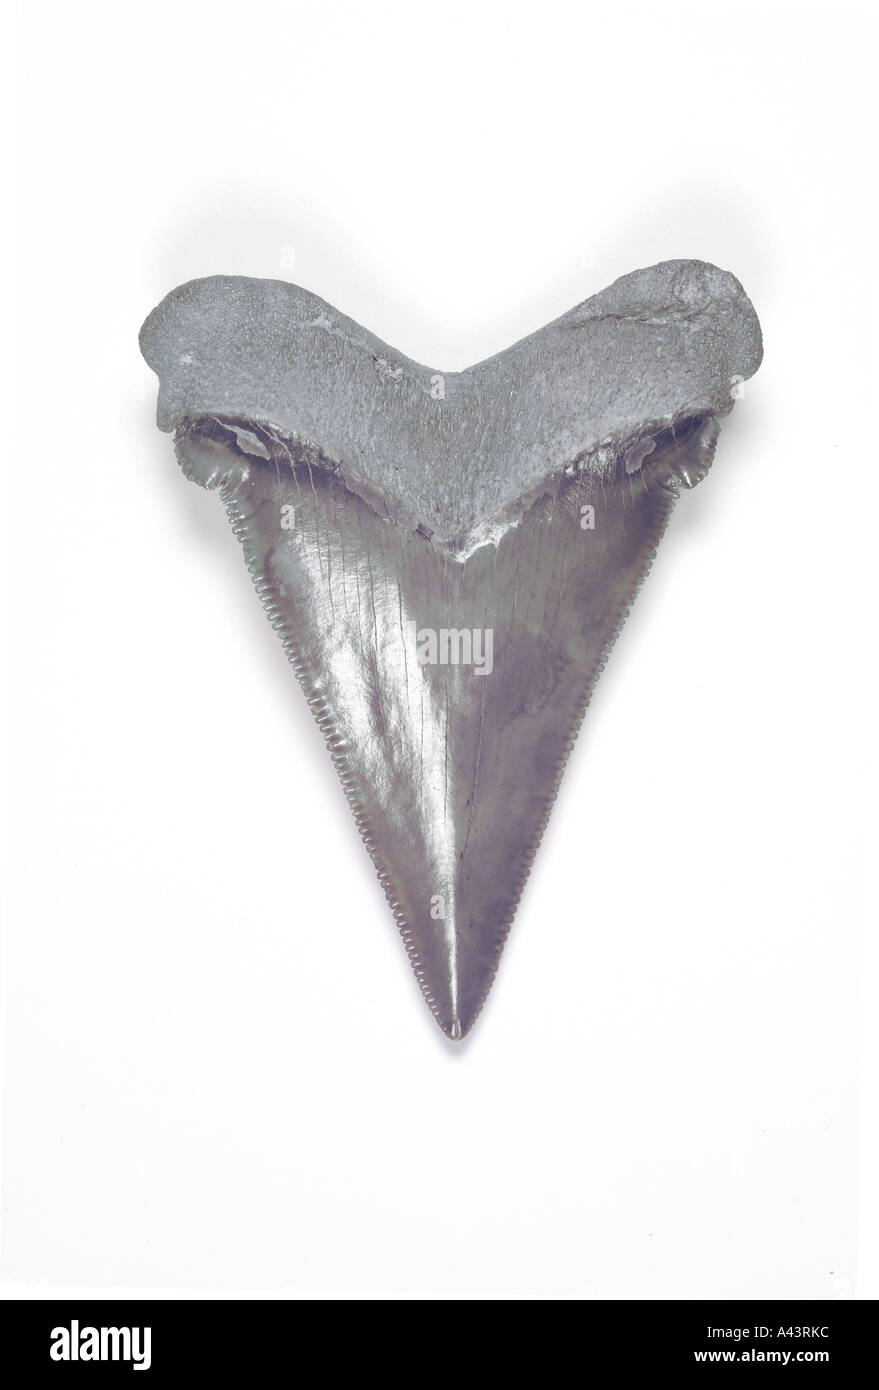 Fossil Tooth From Carcharocles Angustidens Shark (Non-Viewing Side), From Oligocene Epoch Stock Photo